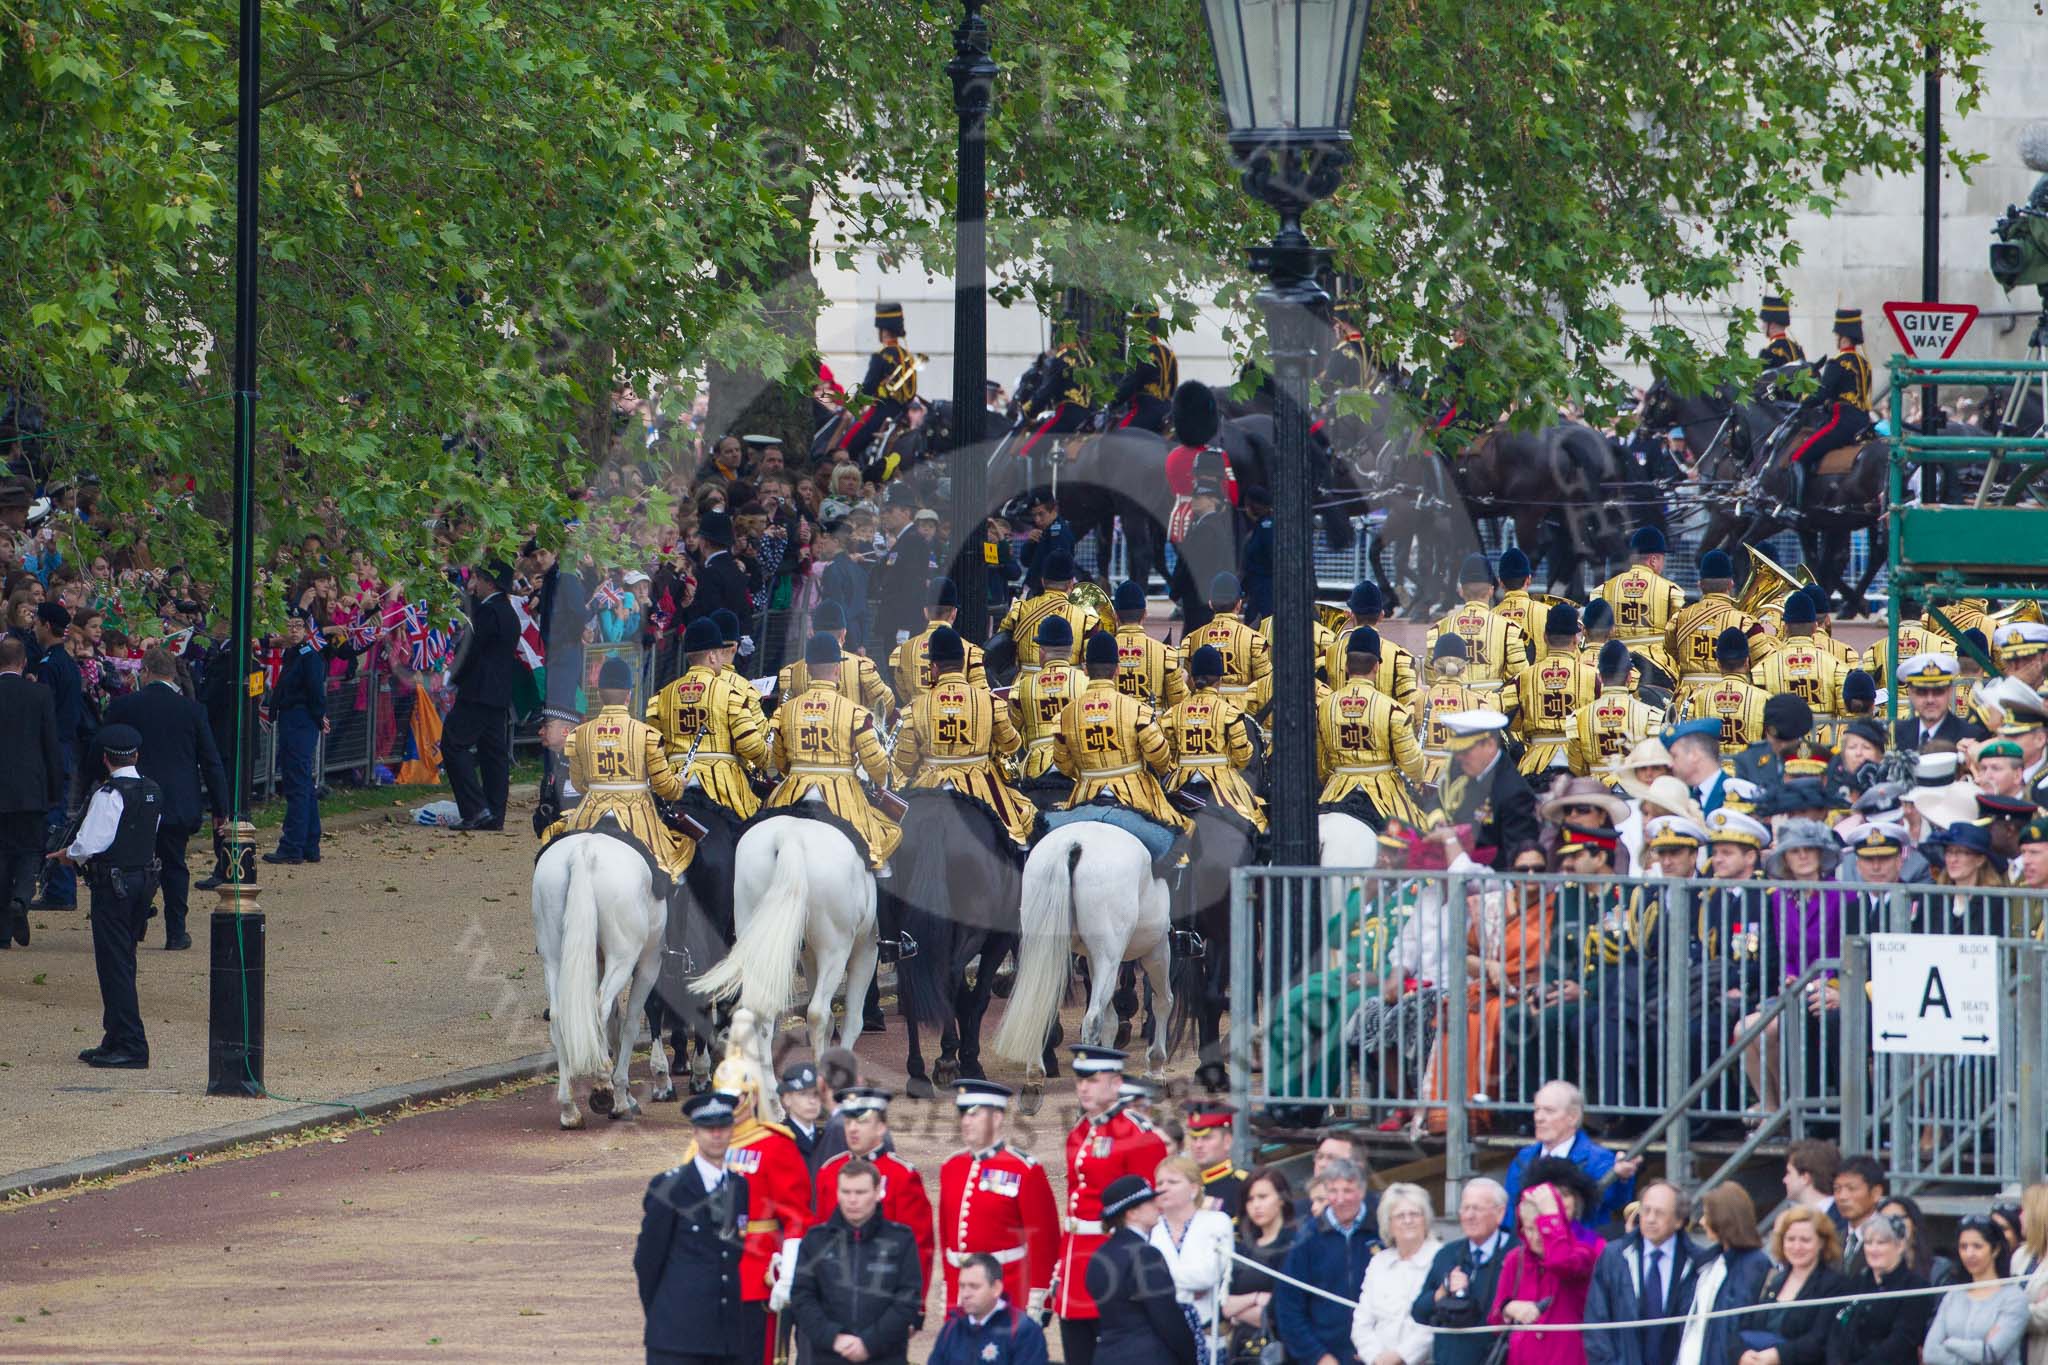 Trooping the Colour 2012: The Massed Mounted Bands are moving up the access road to The Mall, ready for the March Off..
Horse Guards Parade, Westminster,
London SW1,

United Kingdom,
on 16 June 2012 at 12:05, image #622